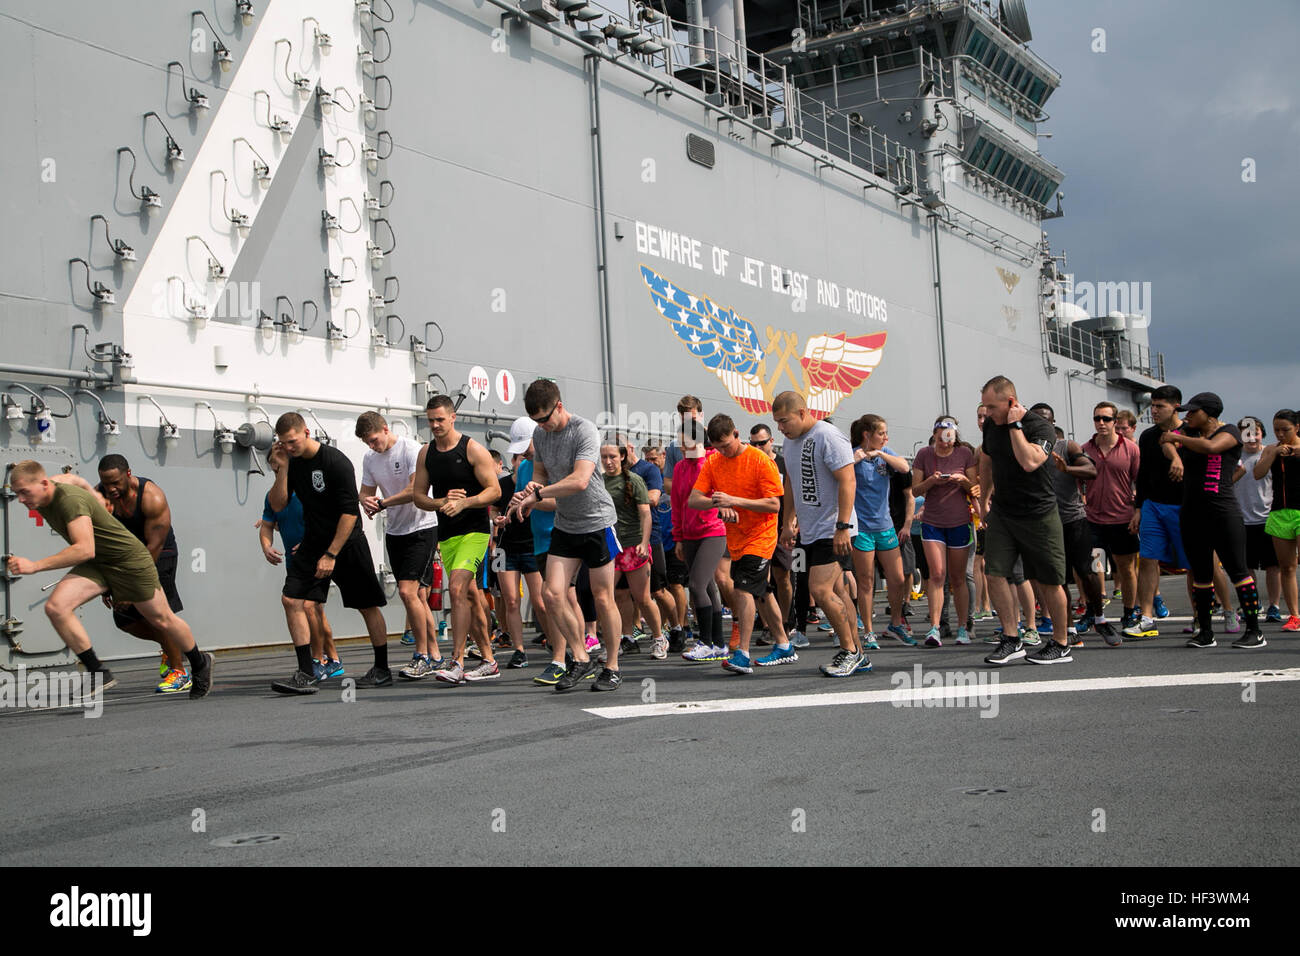 At sea. (March 27, 2016)-U.S. Marines and Sailors with the 13th Marine Expeditionary Unit and Boxer Amphibious Ready Group, take off at the starting line of a 5k run for women's history month, March 27, 2016, during the MEU's western pacific deployment aboard the USS Boxer. More then 4,500 Marines and Sailors from the Boxer ARG, 13th MEU team are currently transiting the Pacific Ocean toward the U.S. 5th fleet area of operations during a scheduled deployment. (U.S. Marine Corps photo by Sgt. Briauna Birl/RELEASED) Women's History 5k aboard USS Boxer 160327-M-KR317-044 Stock Photo